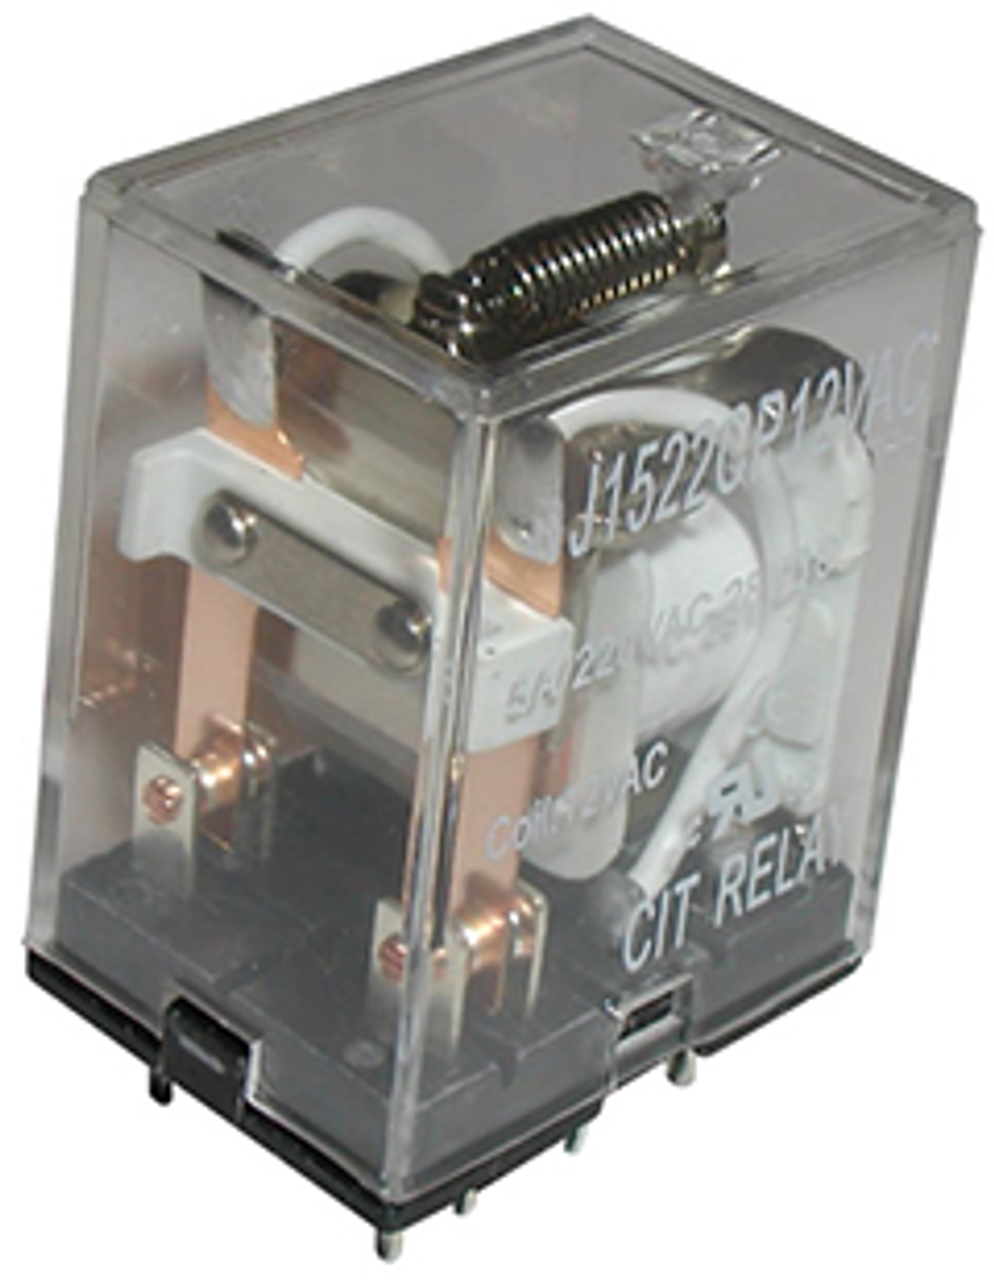 CIT Relay and Switch J1523CF220VACD Industrial Relays